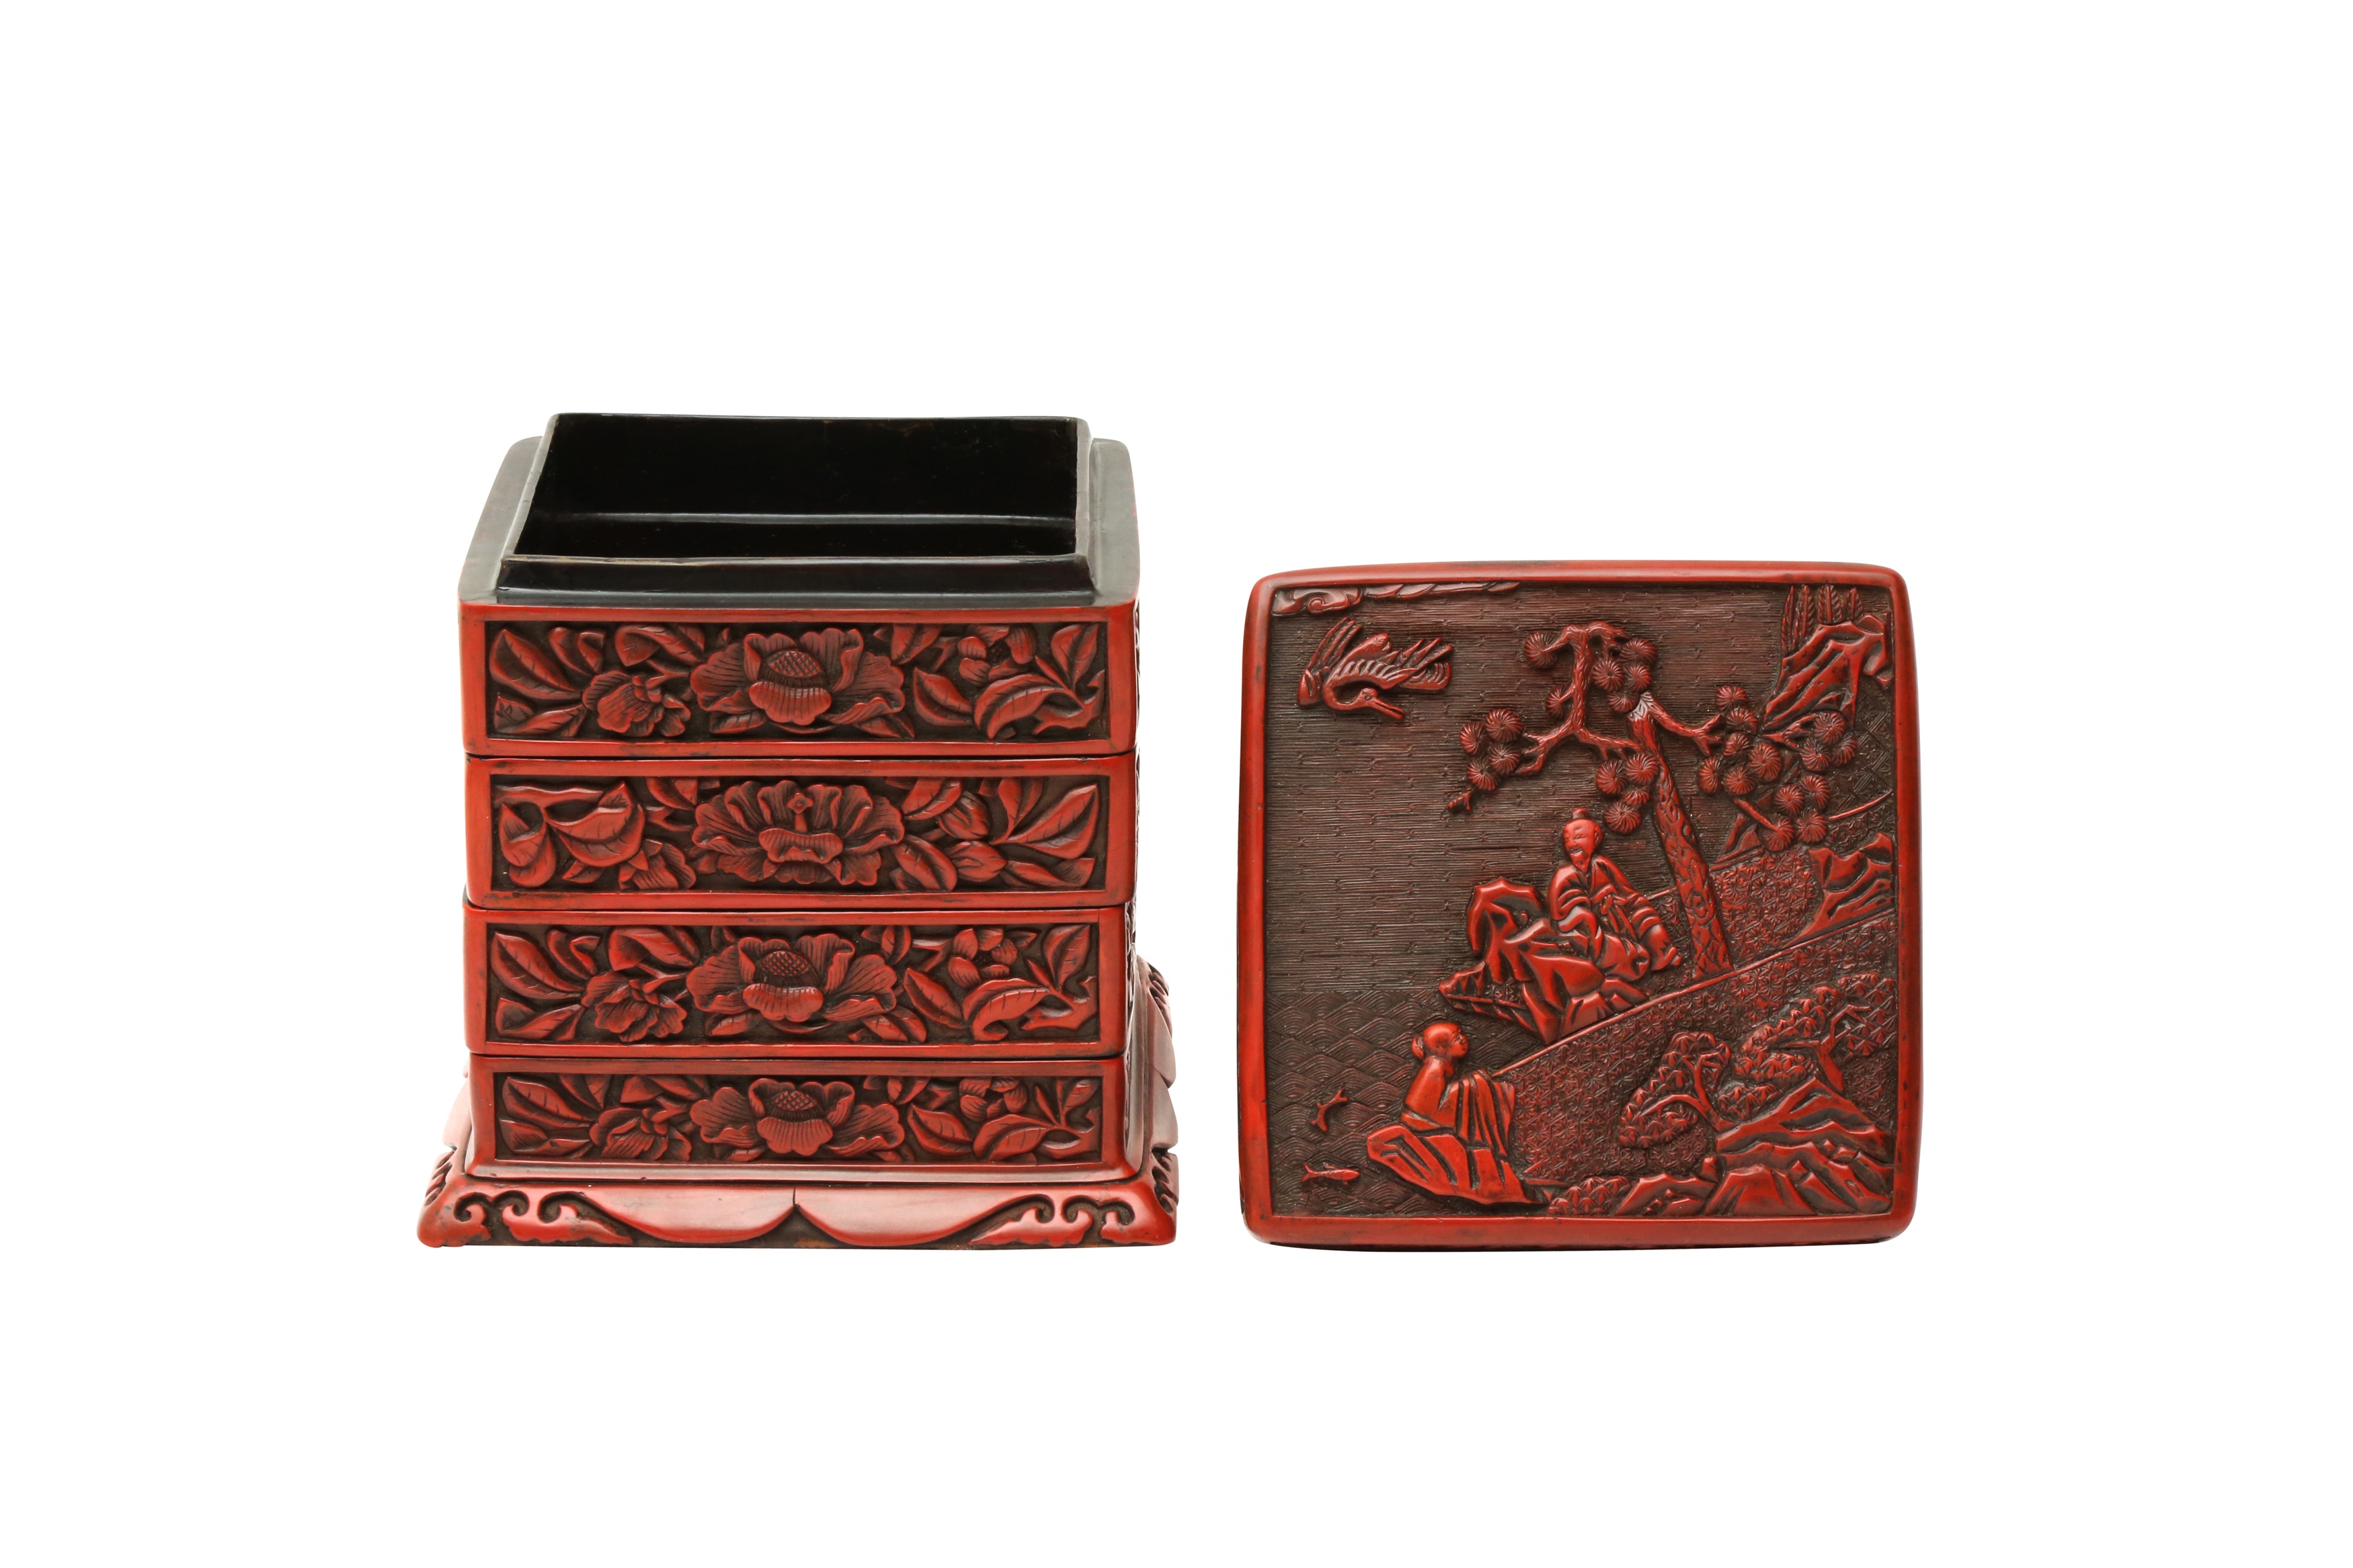 A CHINESE CINNABAR LACQUER TIERED BOX AND COVER 明 剔紅士大夫圖紋四層蓋盒 - Image 2 of 38